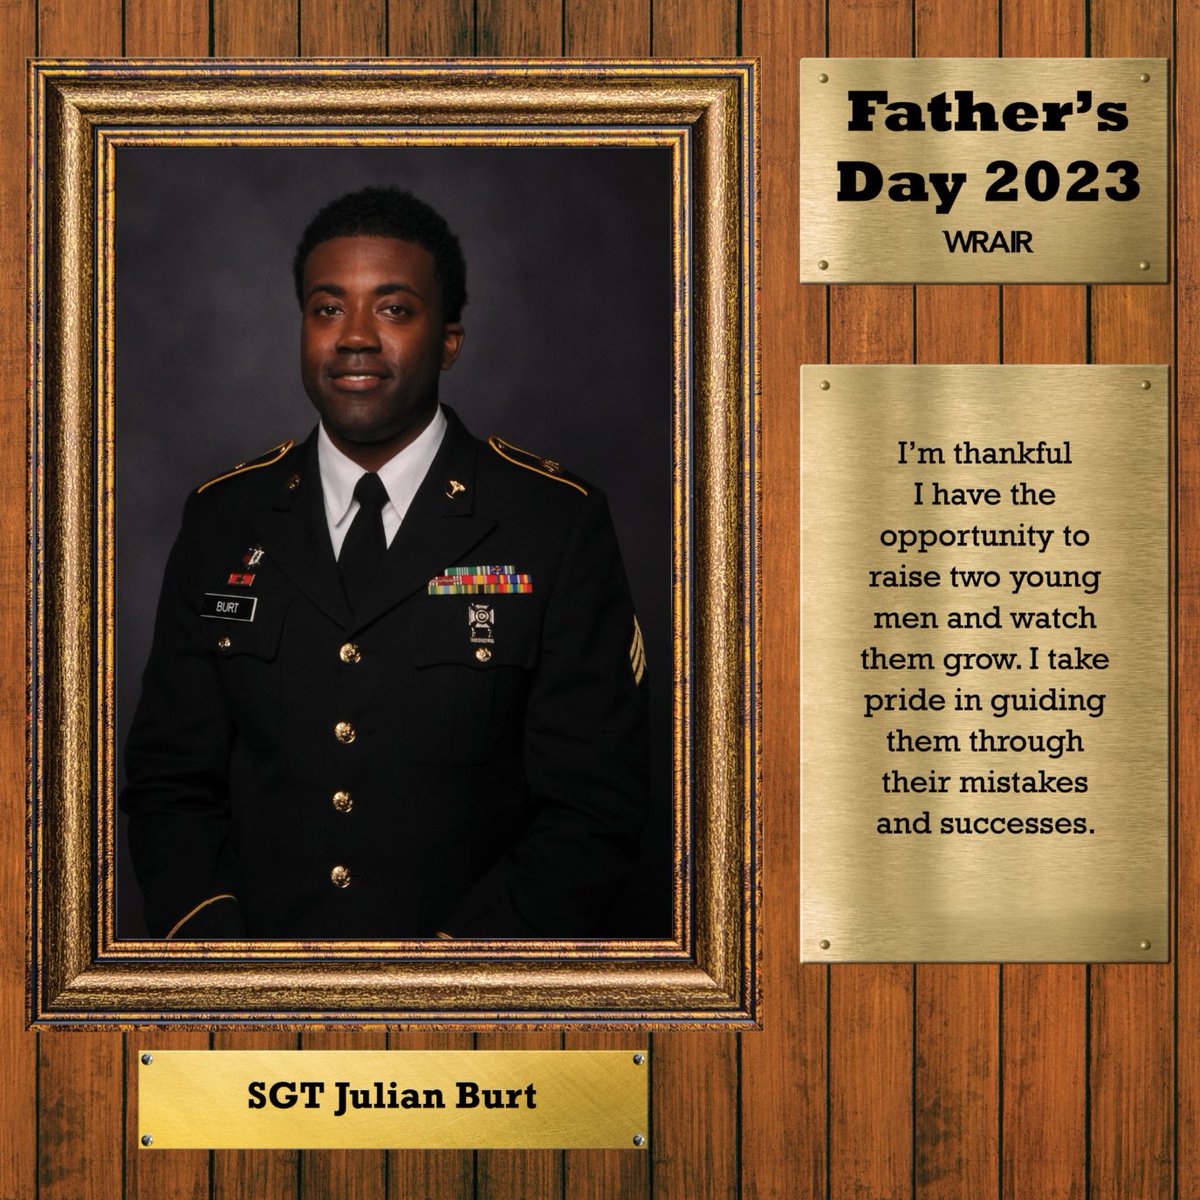 Today, we wanted to show some love to all the great dads out there! We asked our Soldiers and civilians to share some insights and appreciation for the dads out there. #peoplefirst